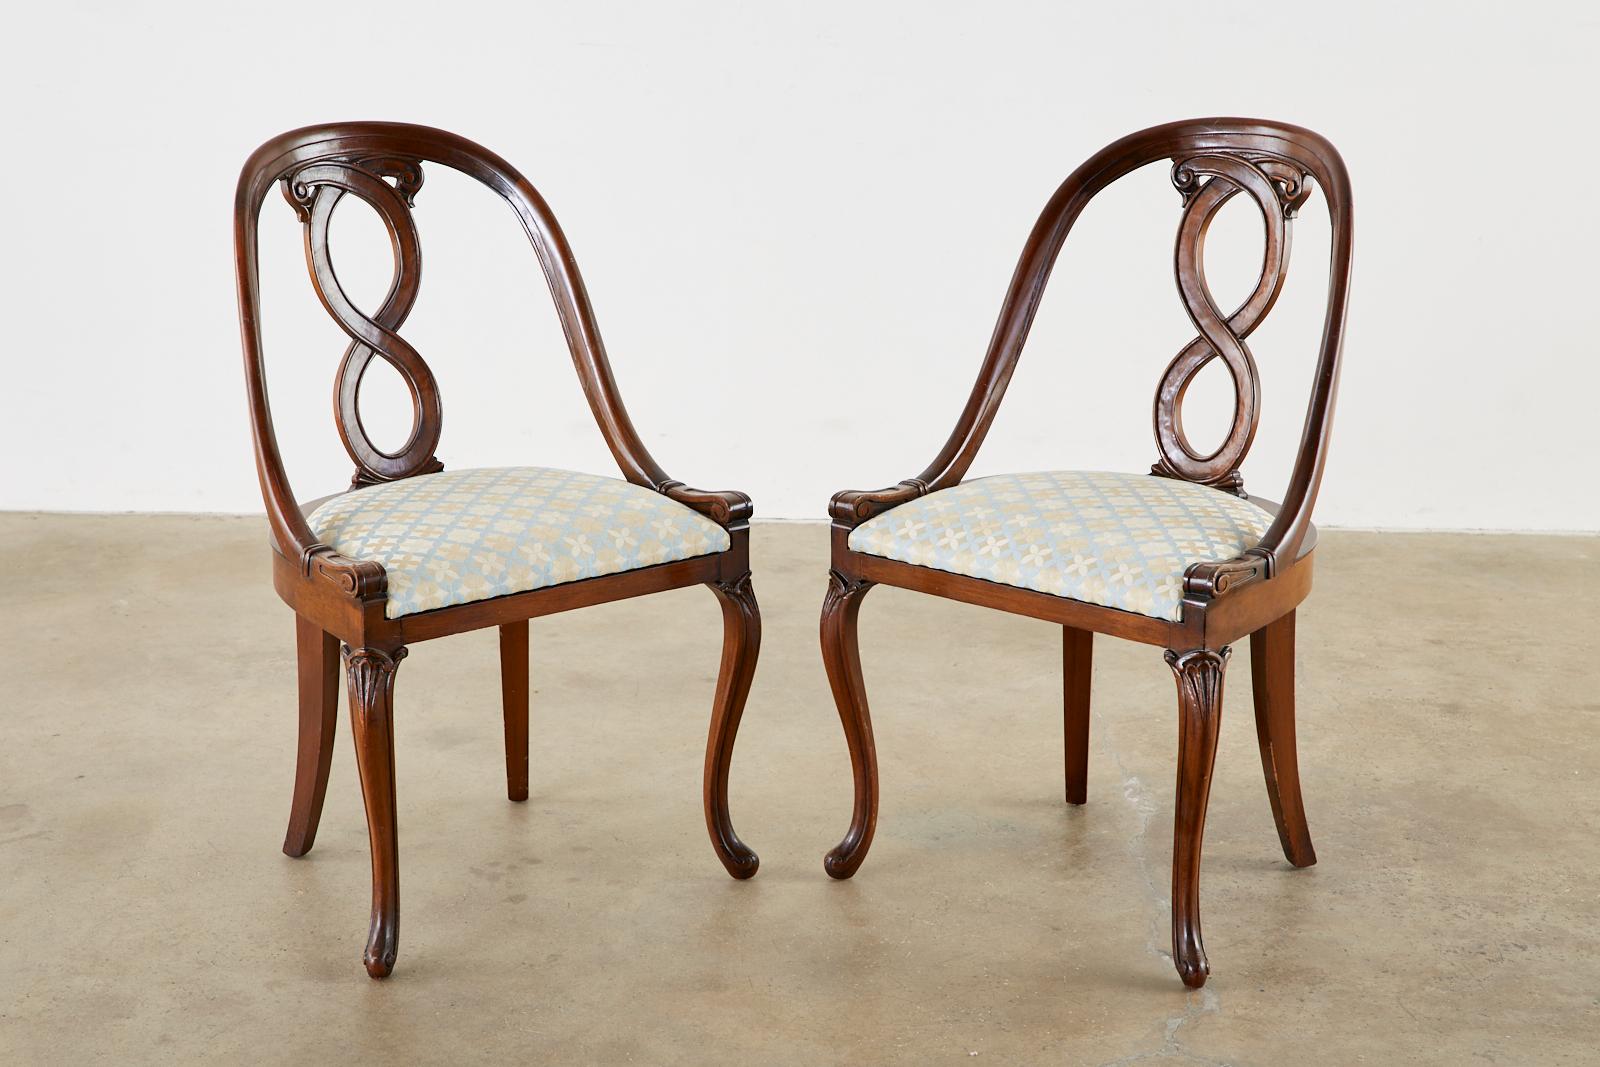 Hand-Crafted Pair of English Regency Spoon Back Mahogany Chairs